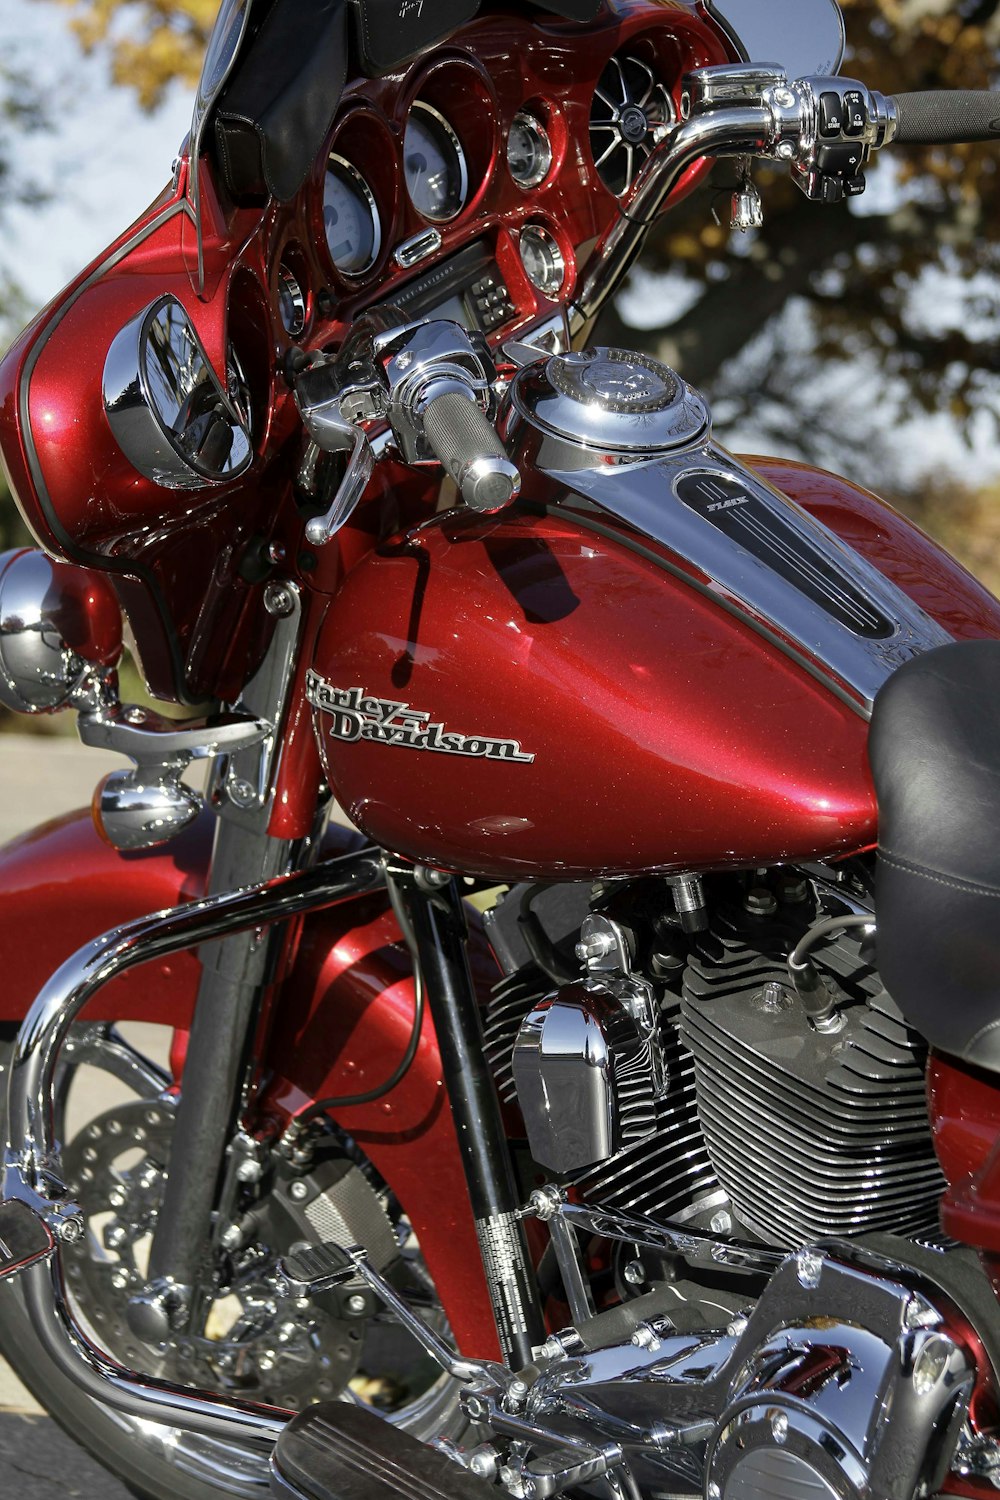 red and black motorcycle during daytime